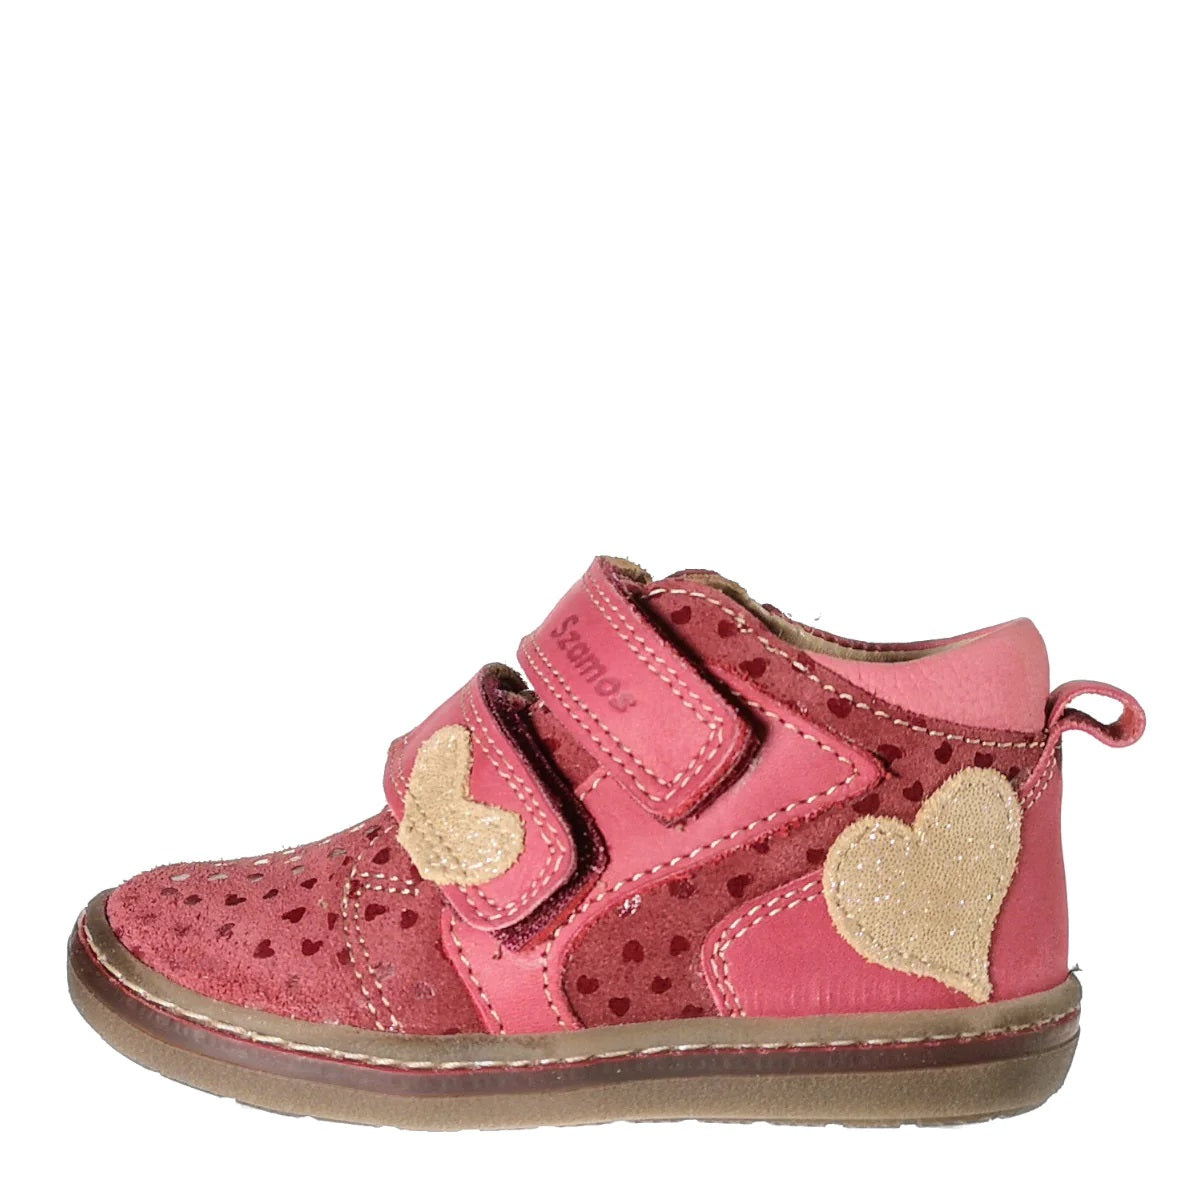 Premium quality sneakers made from 100% genuine leather lining and upper, red with beige heart decor and double velcro straps. This Szamos Kids product meets the highest expectations of healthy and comfortable kids shoes. The exceptional comfort these shoes provide assure the well-being and happiness of your child.